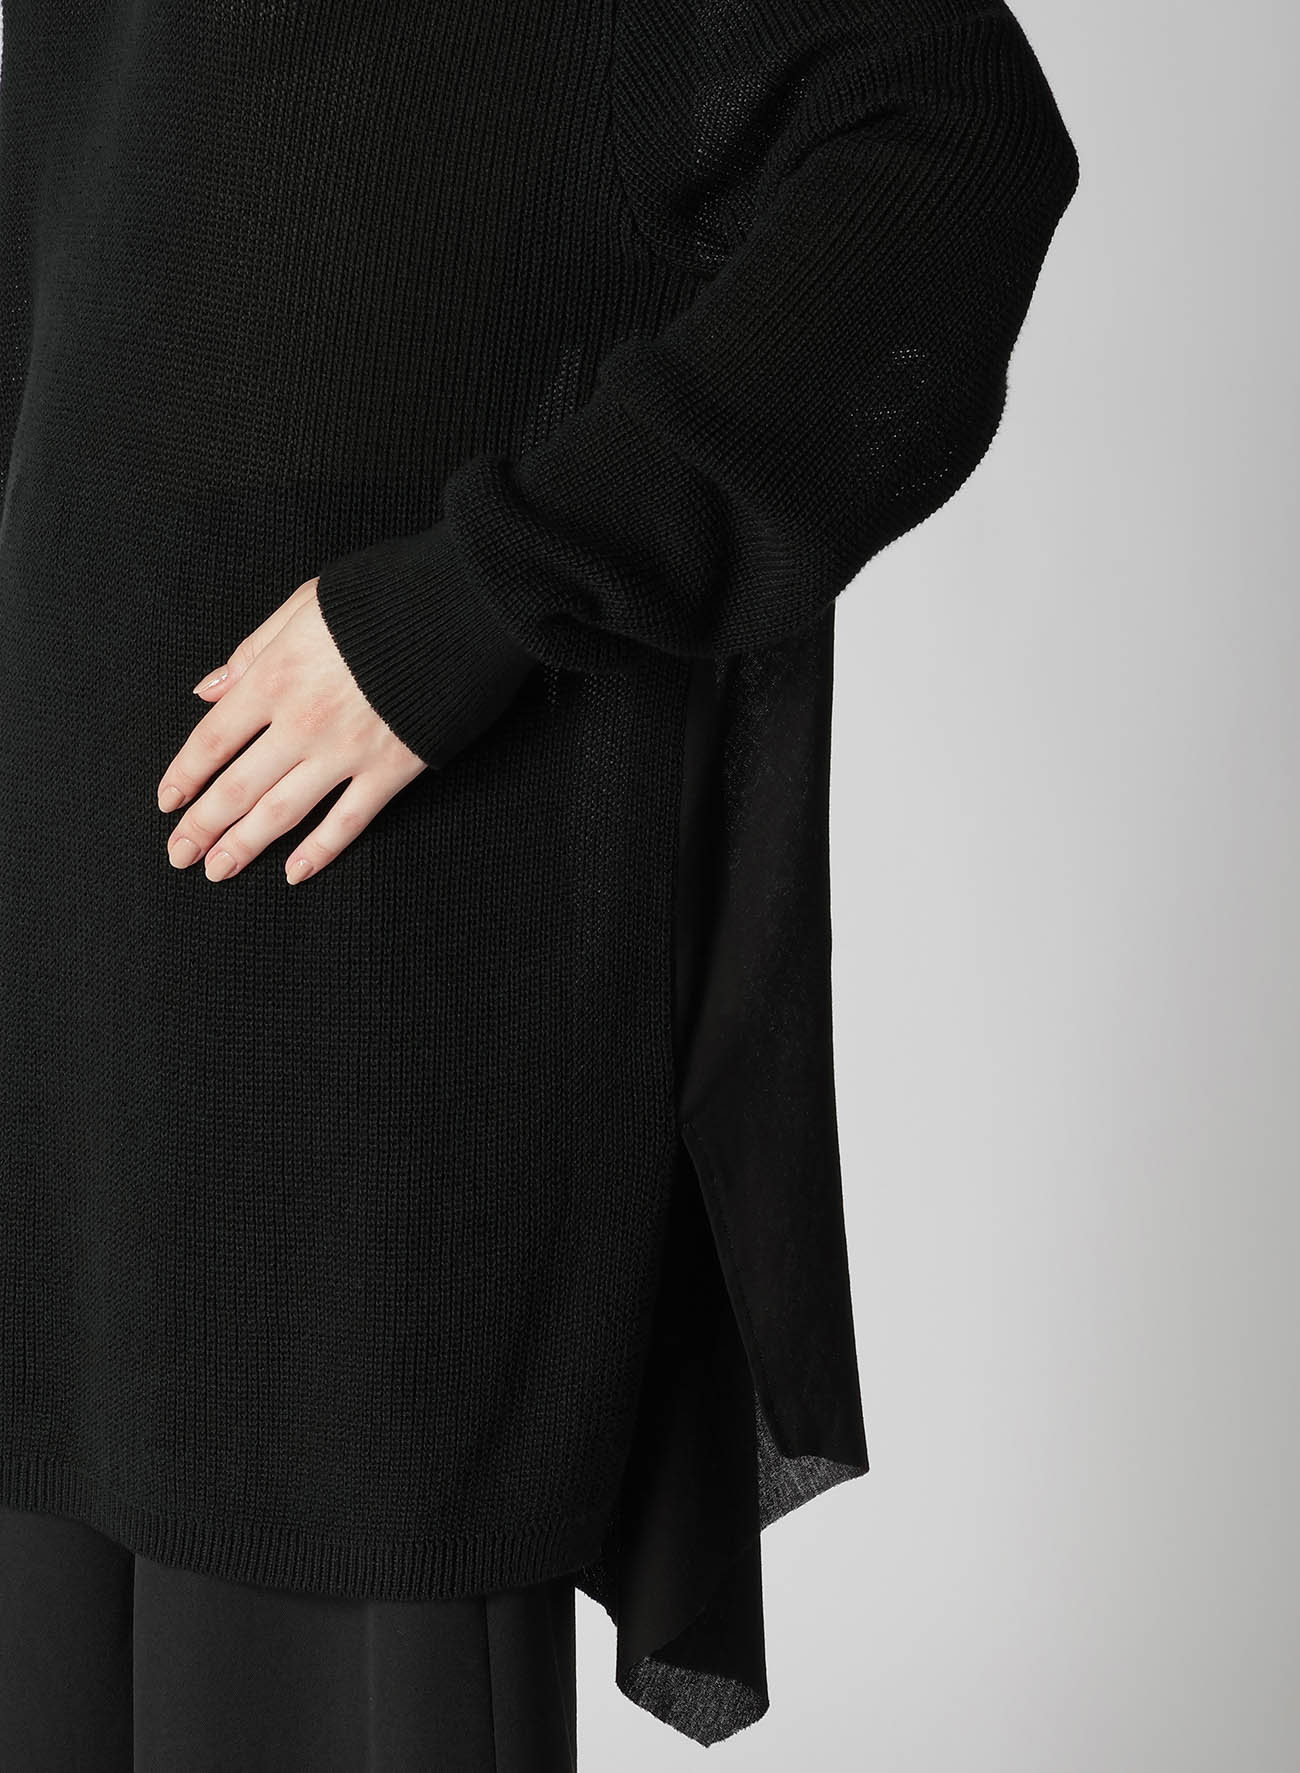 COTTON BREND BACK DRAPE LONG SLEEVE KNIT PULLOVER